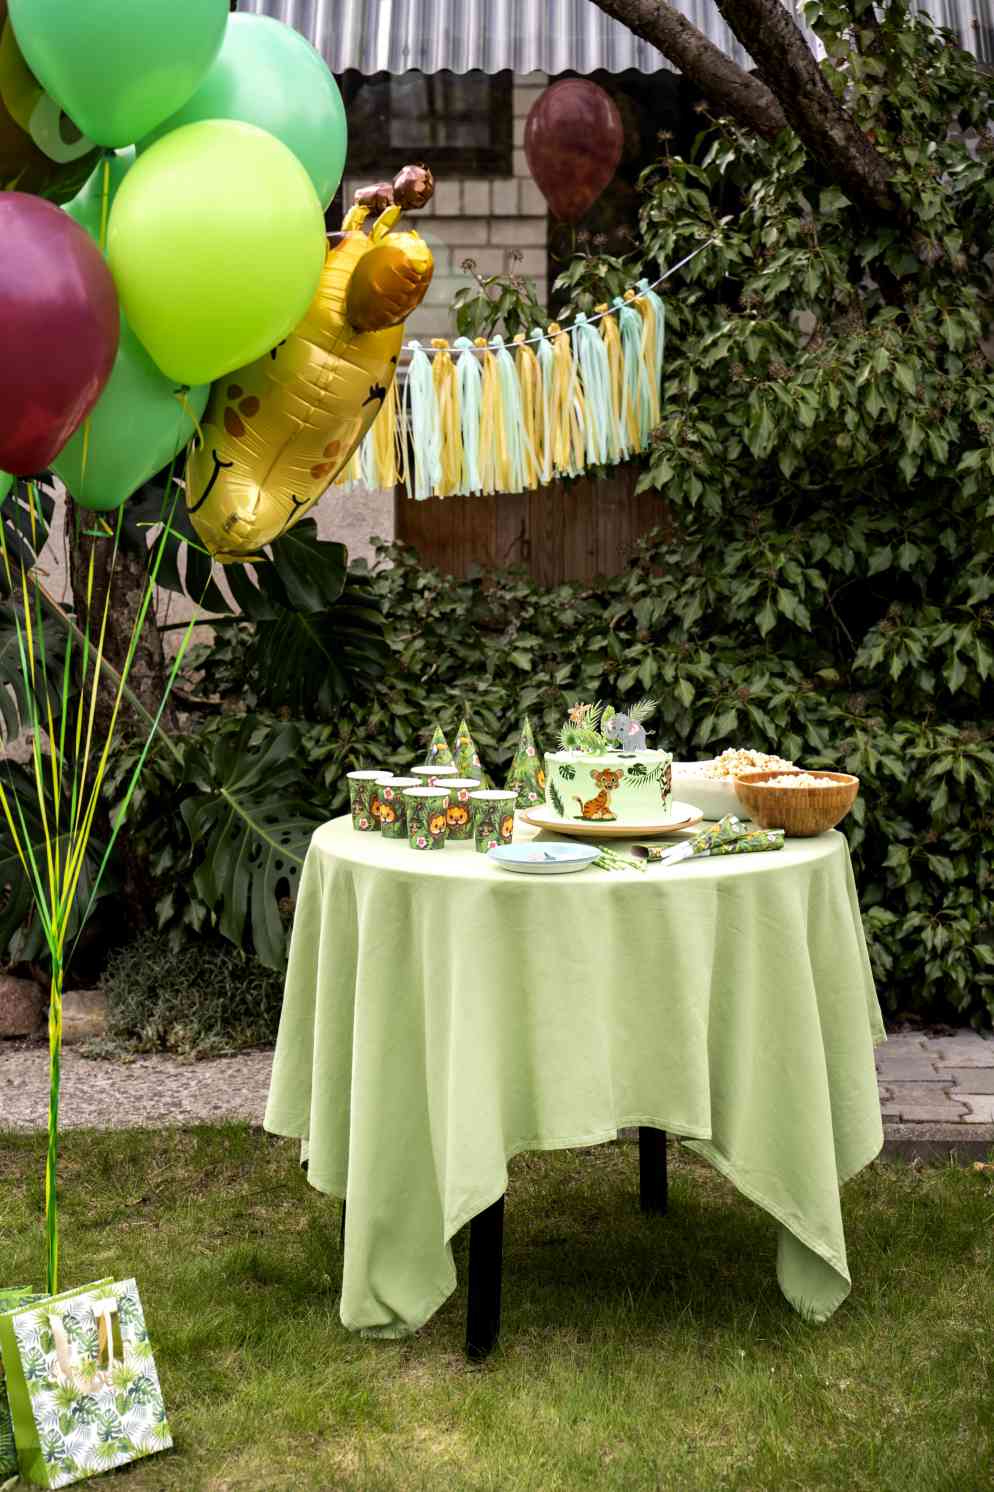 tropical paradise party decoration kids having fun jungle themed party